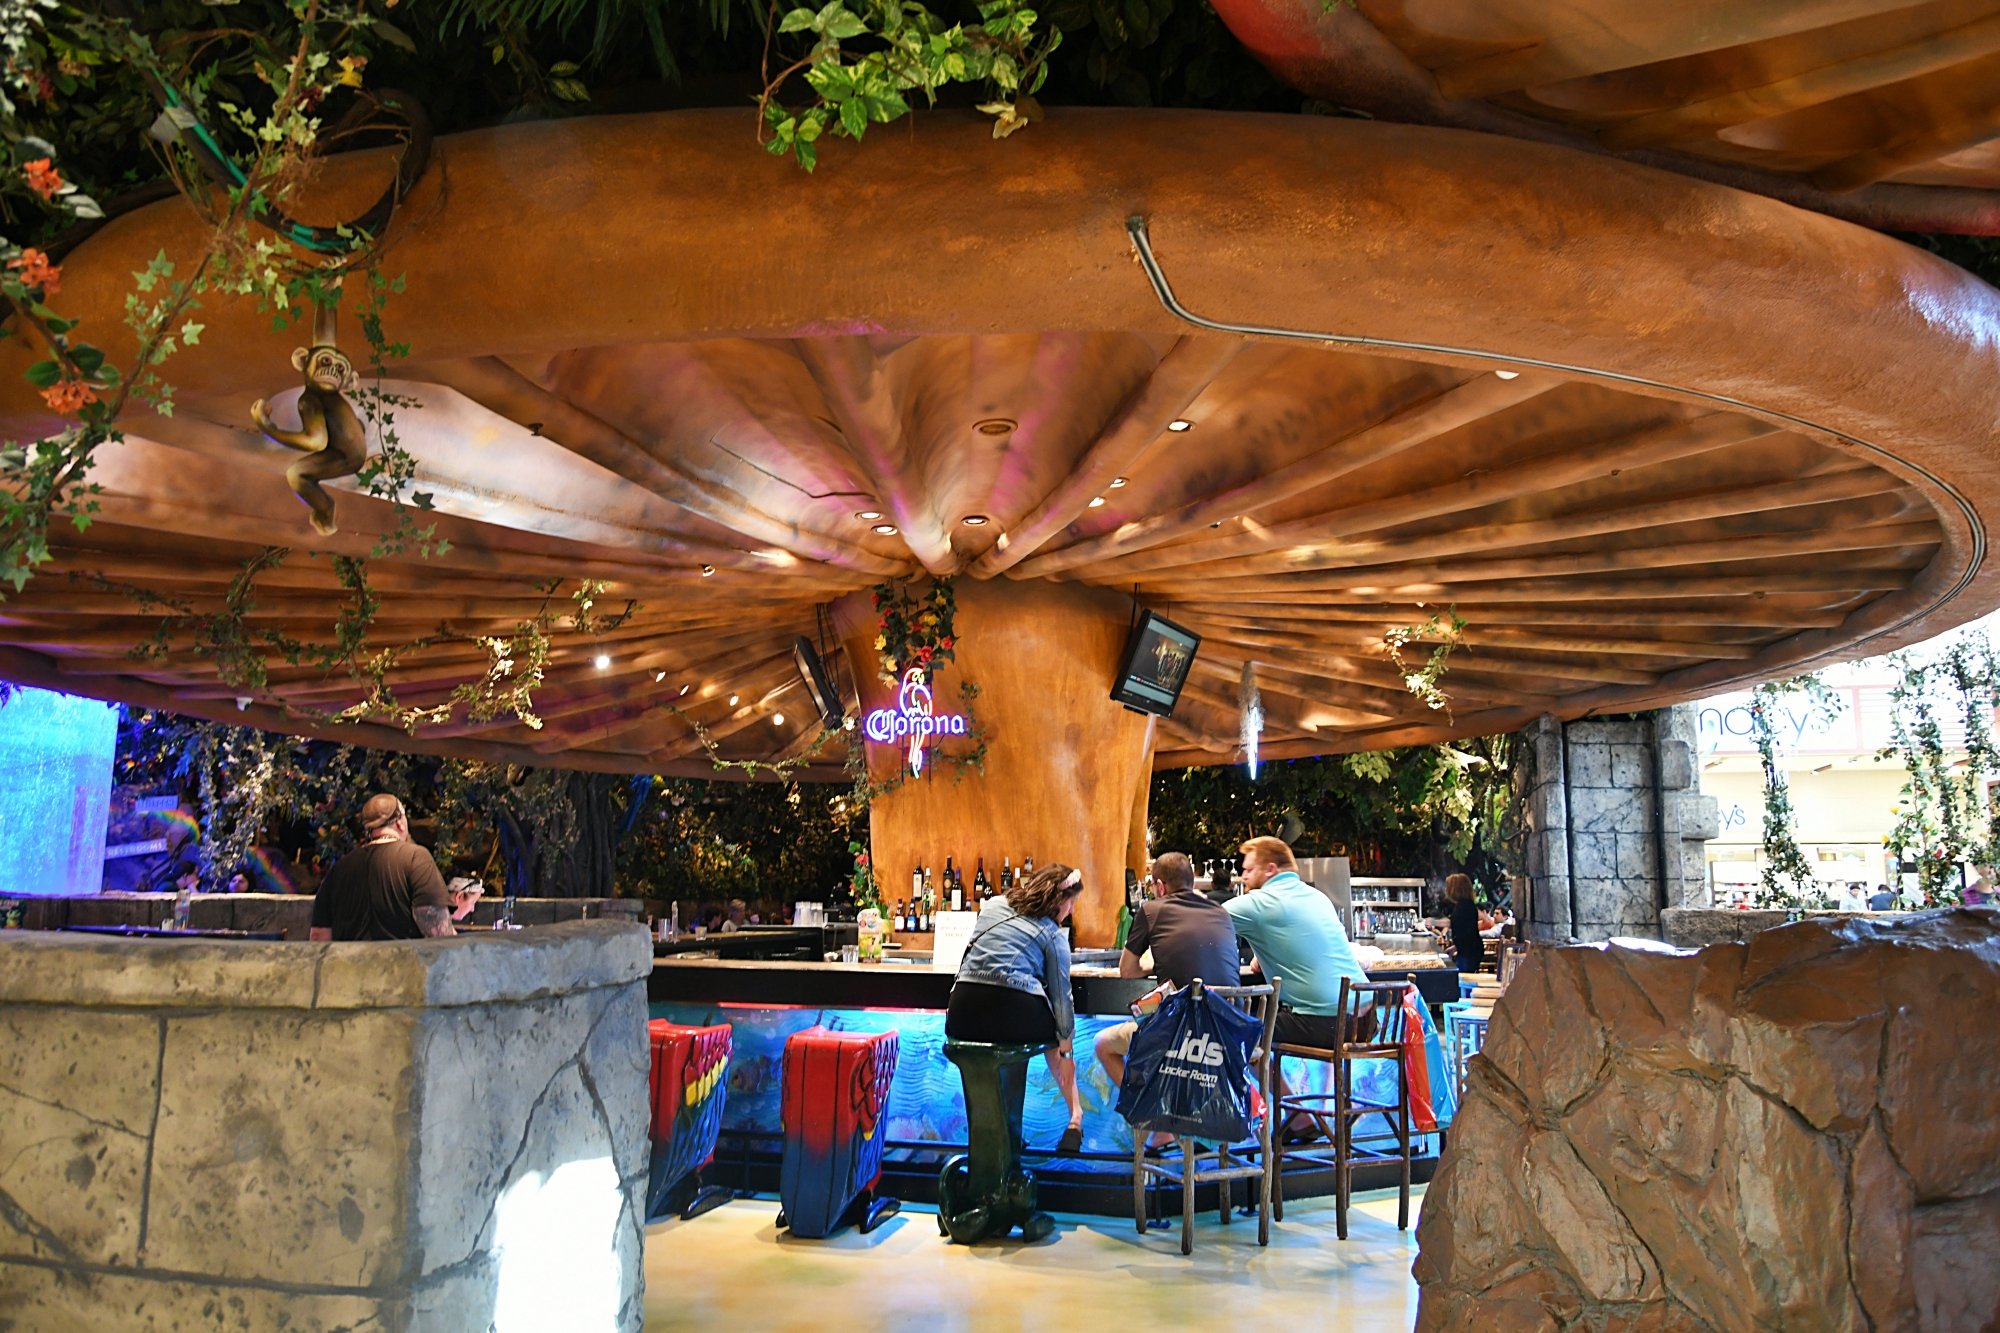 Visiting the last Rainforest Cafe in Illinois offers an expedition in nostalgia